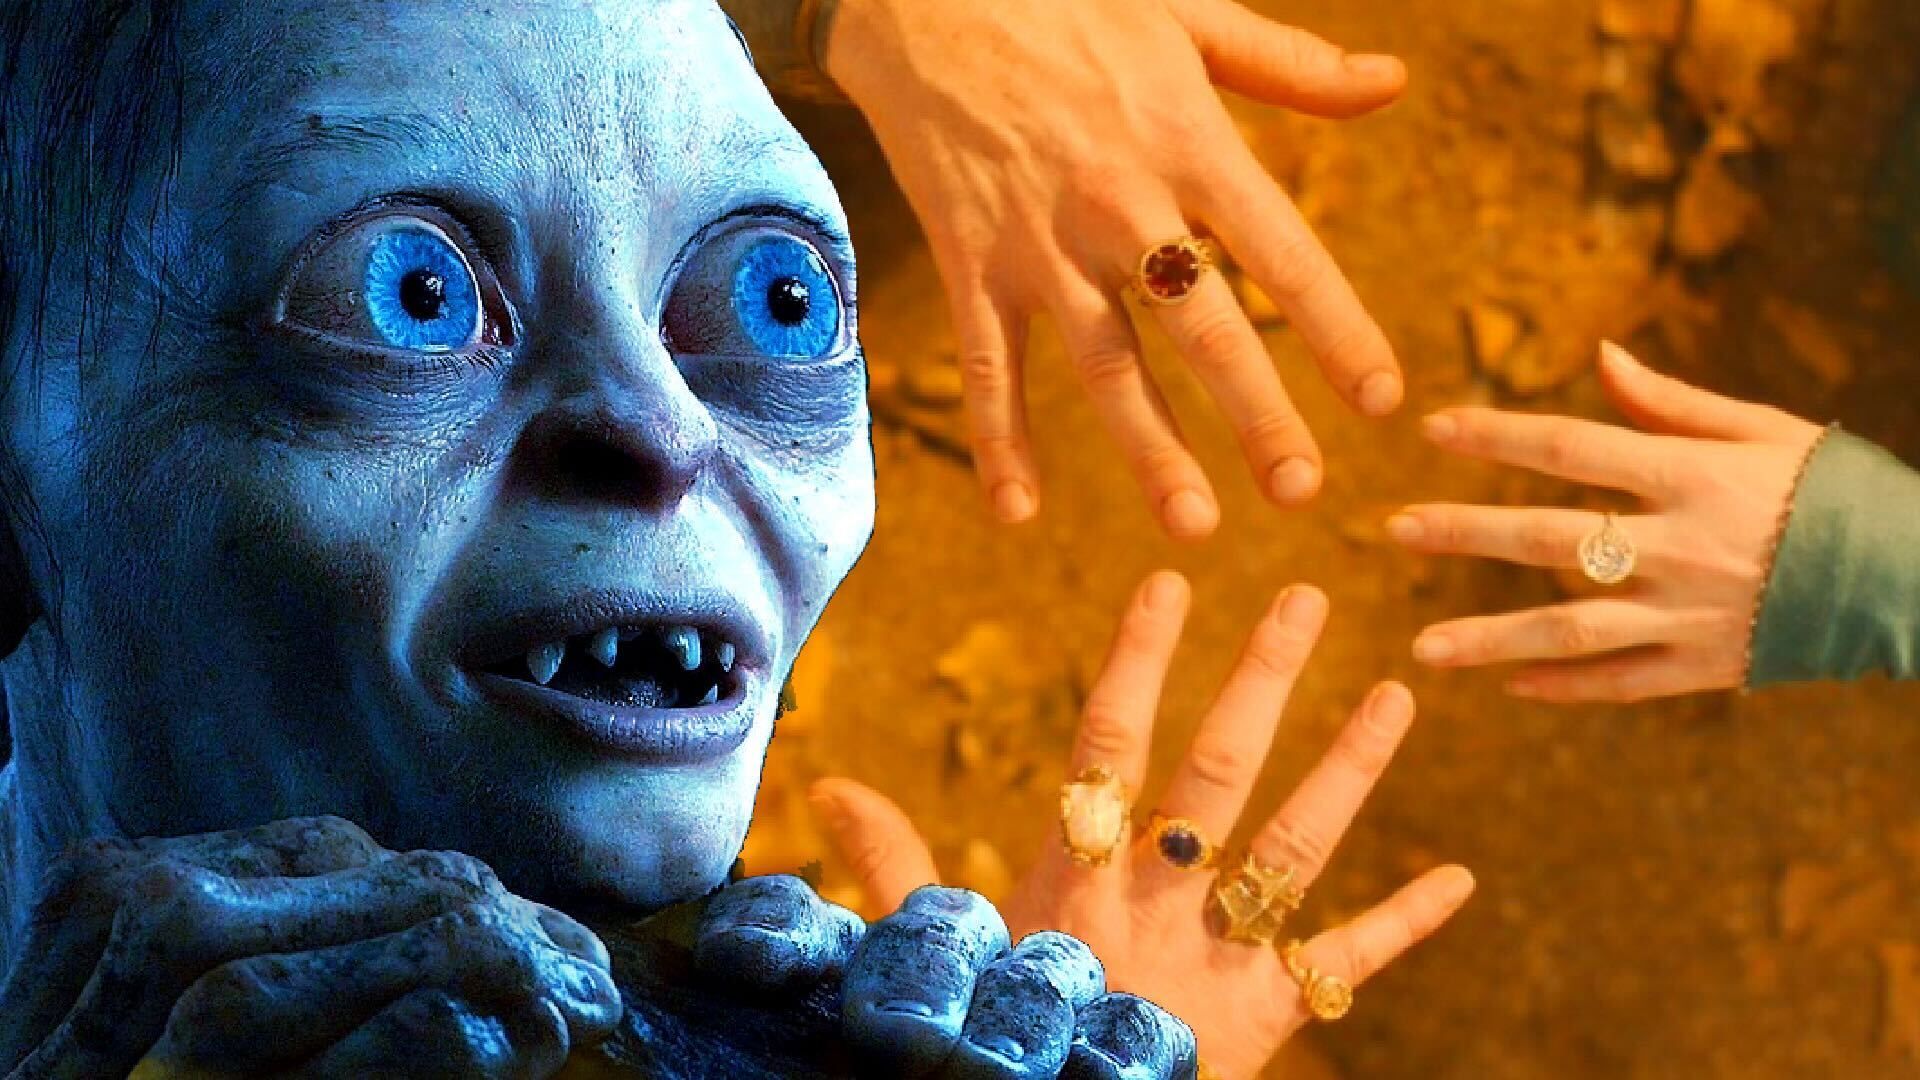 Gollum Looking at the Rings of Power